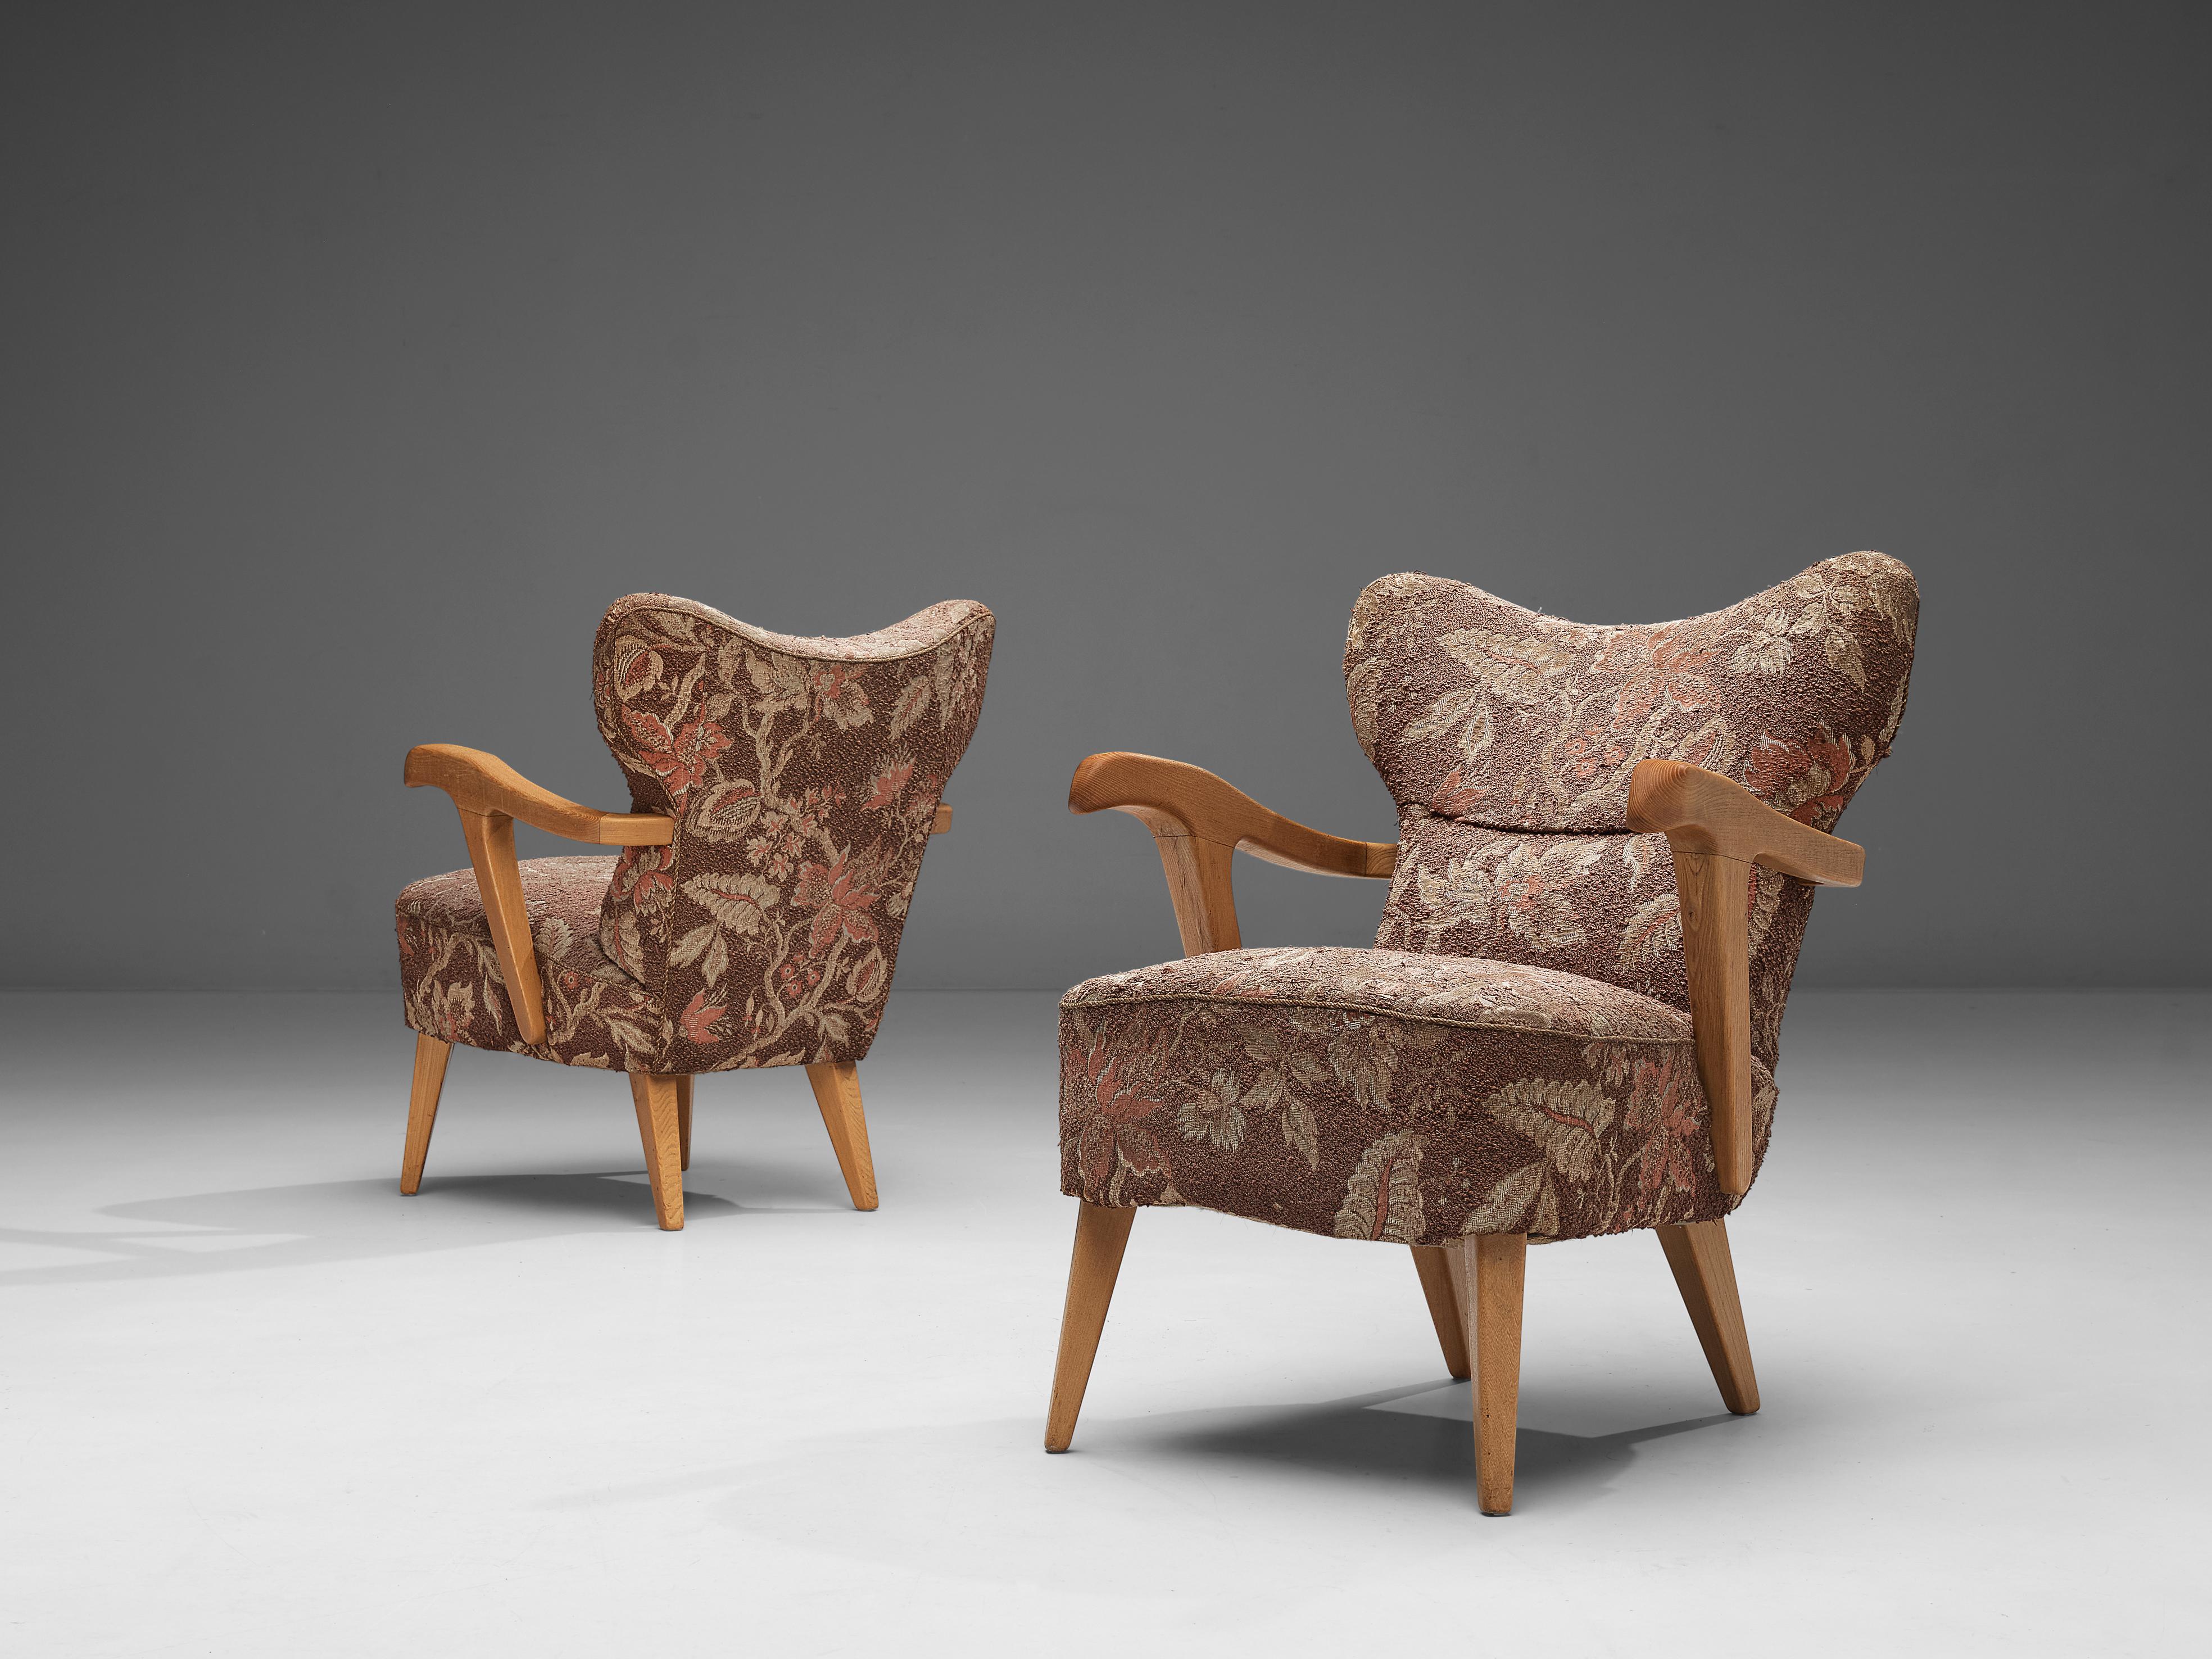 Pair of lounge chairs, oak, fabric, Italy, 1960s

This sculptural wingback chair of the 1960s is both extremely comfortable and pleasing to the eyes. This easy chair features curved, armchairs made out of oak that add to the shape of the chair. The